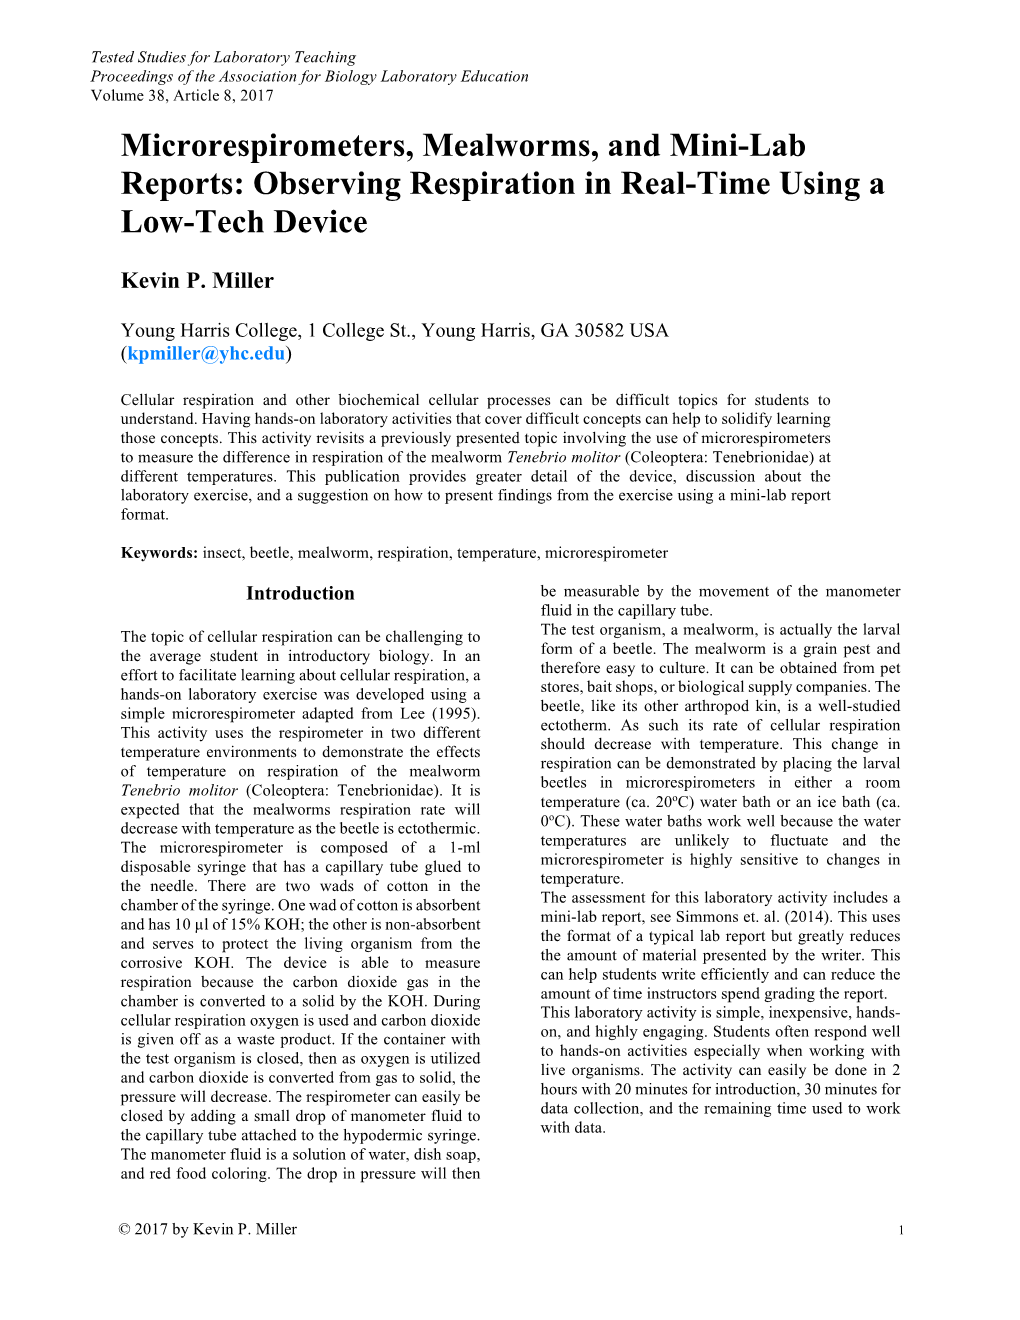 Microrespirometers, Mealworms, and Mini-Lab Reports: Observing Respiration in Real-Time Using a Low-Tech Device